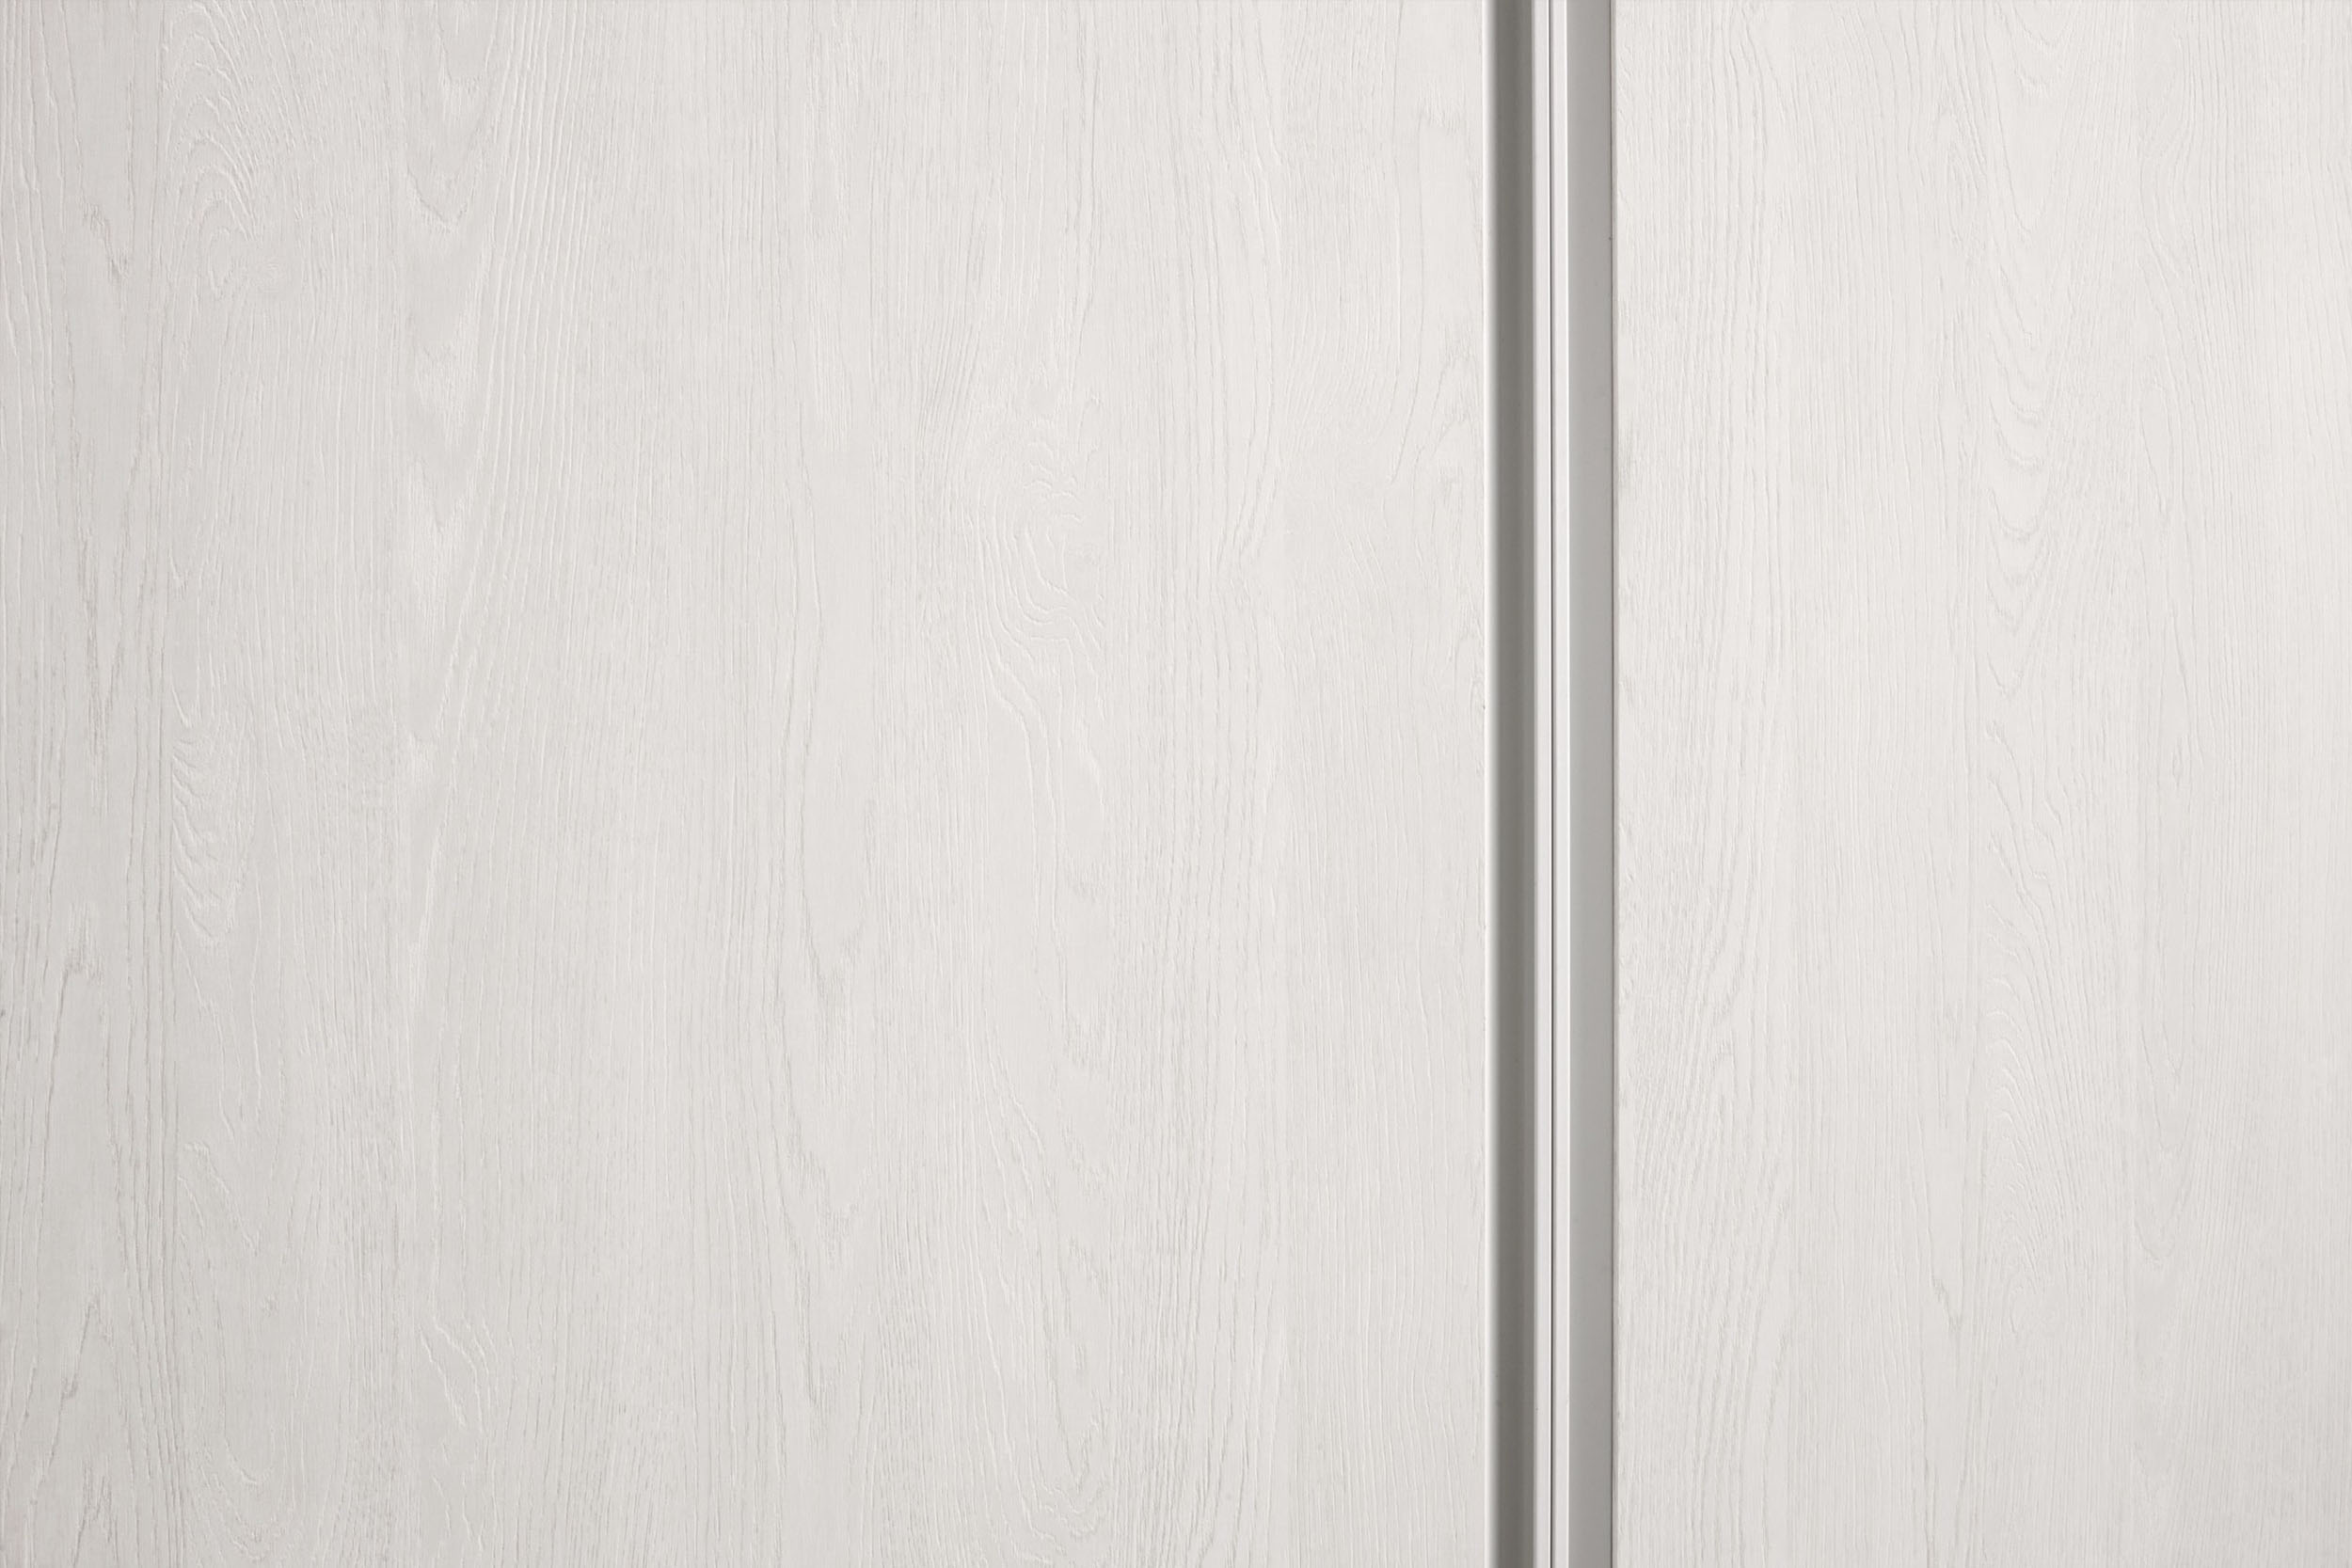 Luxury Italian sliding wardrobe with full-height handle grip. Available to be installed set against a wall, recessed or on a wall corner. Designed and install by Krieder